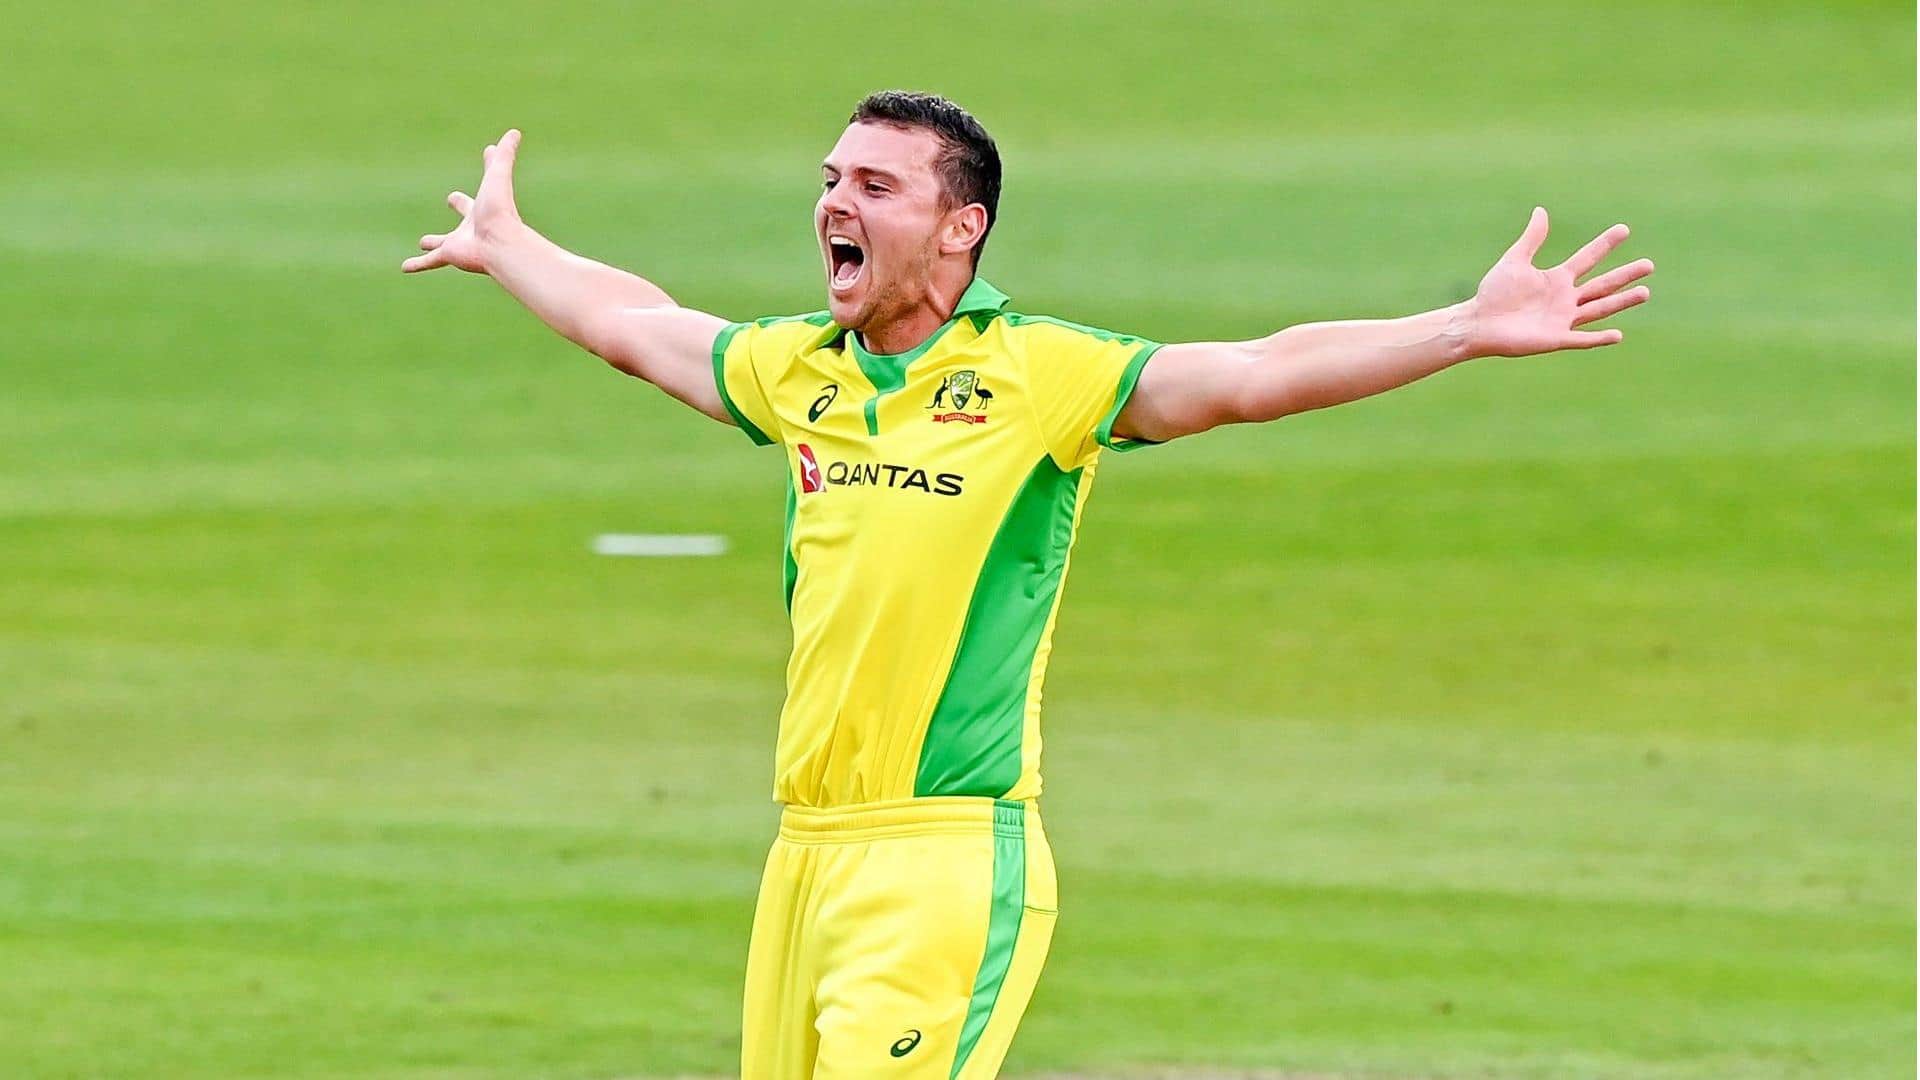 Josh Hazlewood completes 50 first-innings wickets in ODIs: Stats